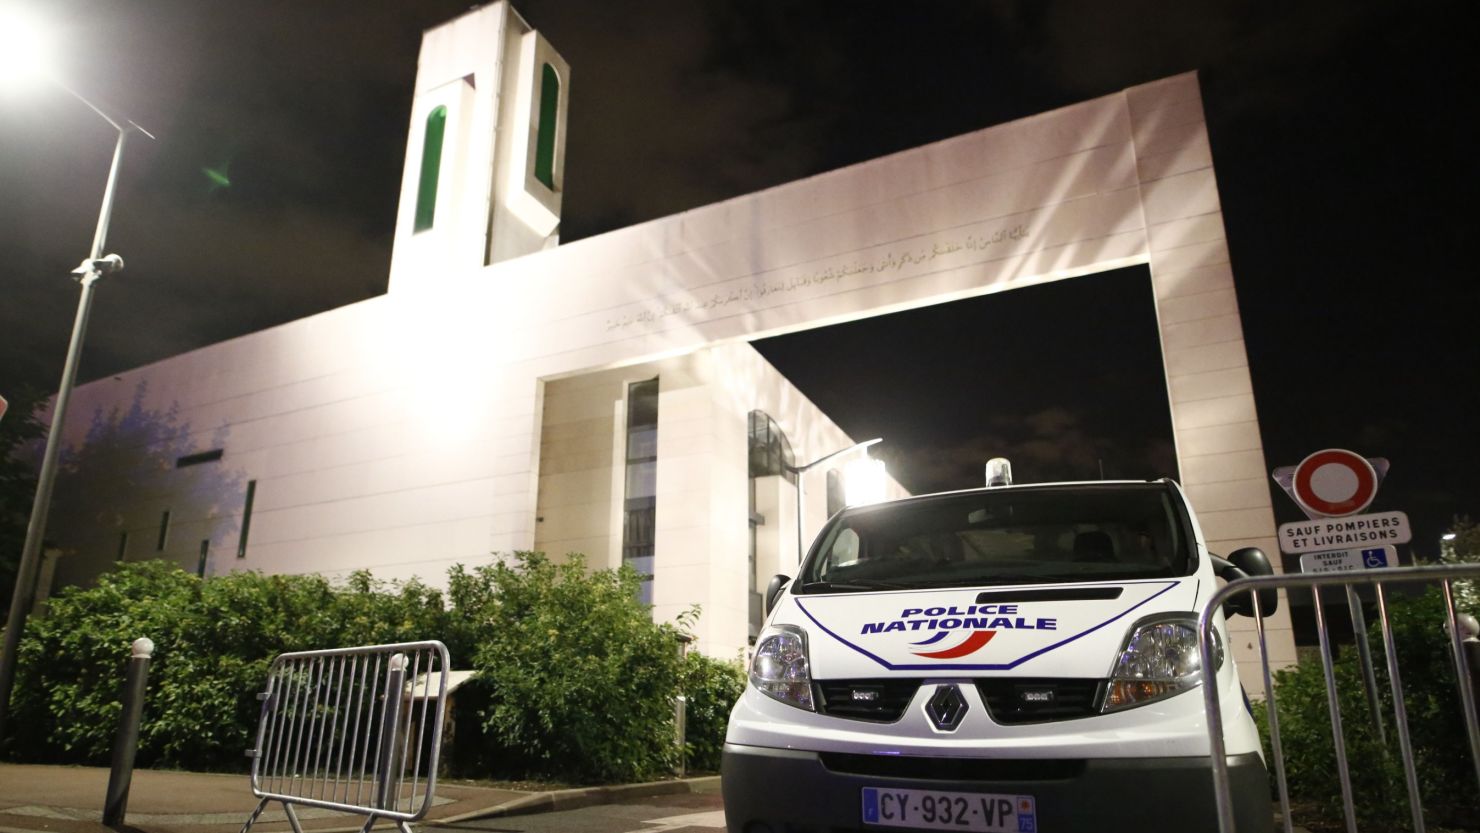 A police vehicle is stationed outside a mosque June 29, 2017 in the Paris suburb of Creteil after a man tried to drive a car into a crowd in front of the Islamic religious facility.  